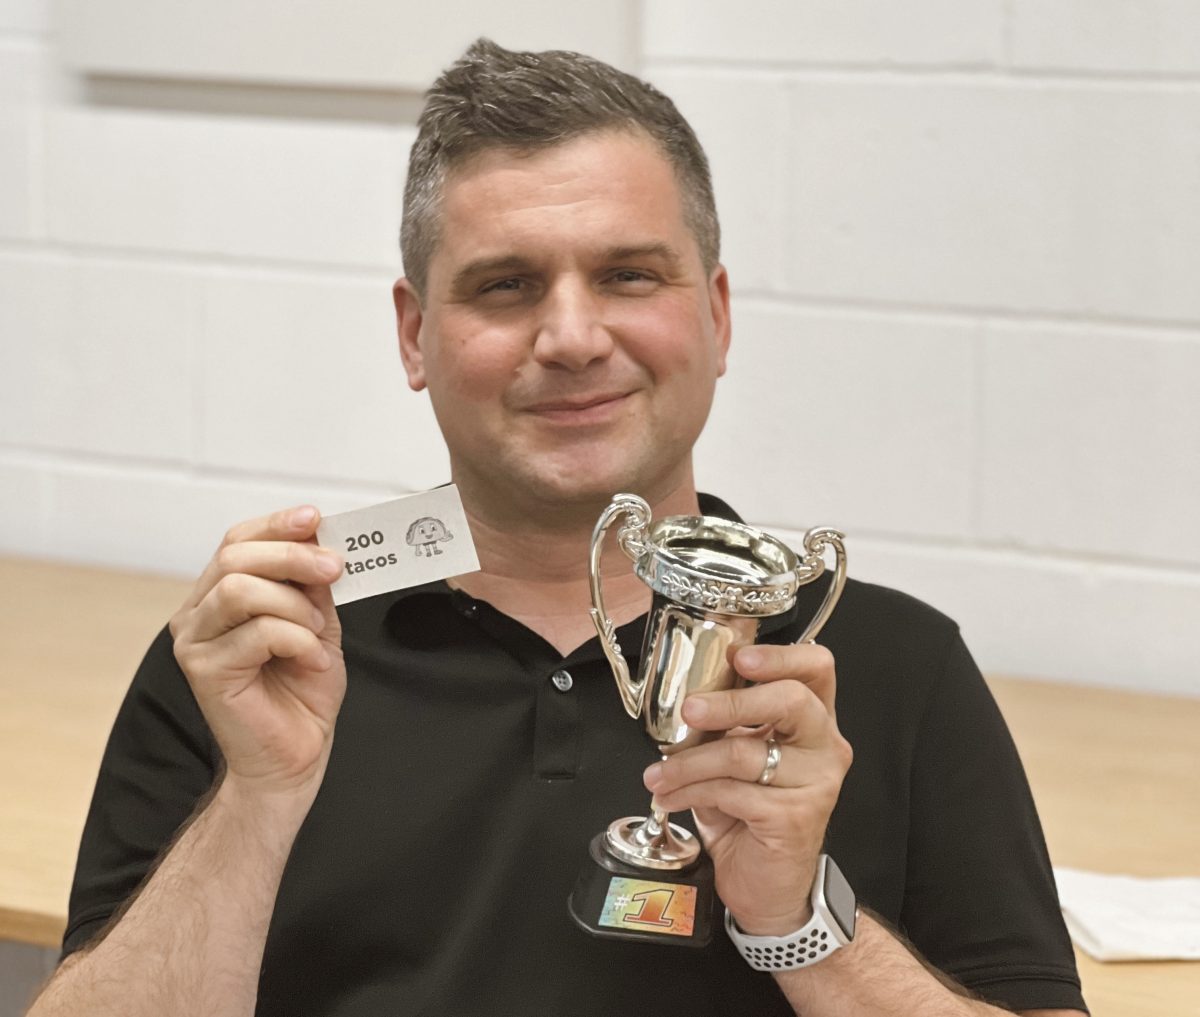 Man smiling holding a trophy and a reward ticket.